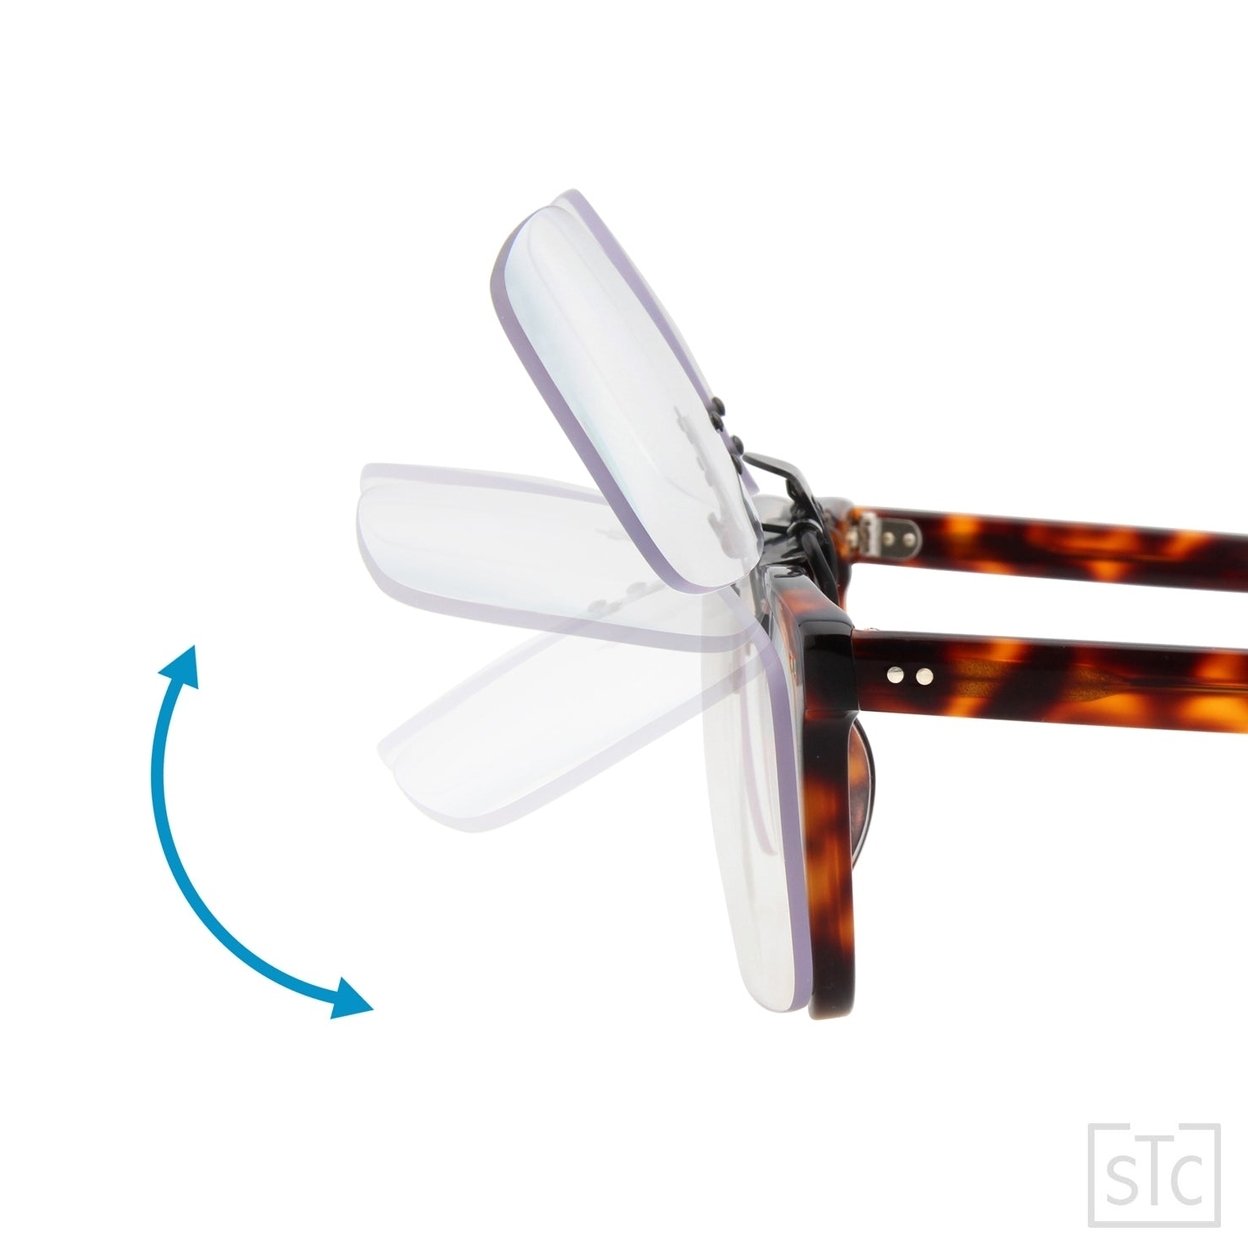 Clip-on Flip Up Rimless Magnifying, Suitable For Reading Glasses, Clip Onto Over Eyeglasses - +3.50